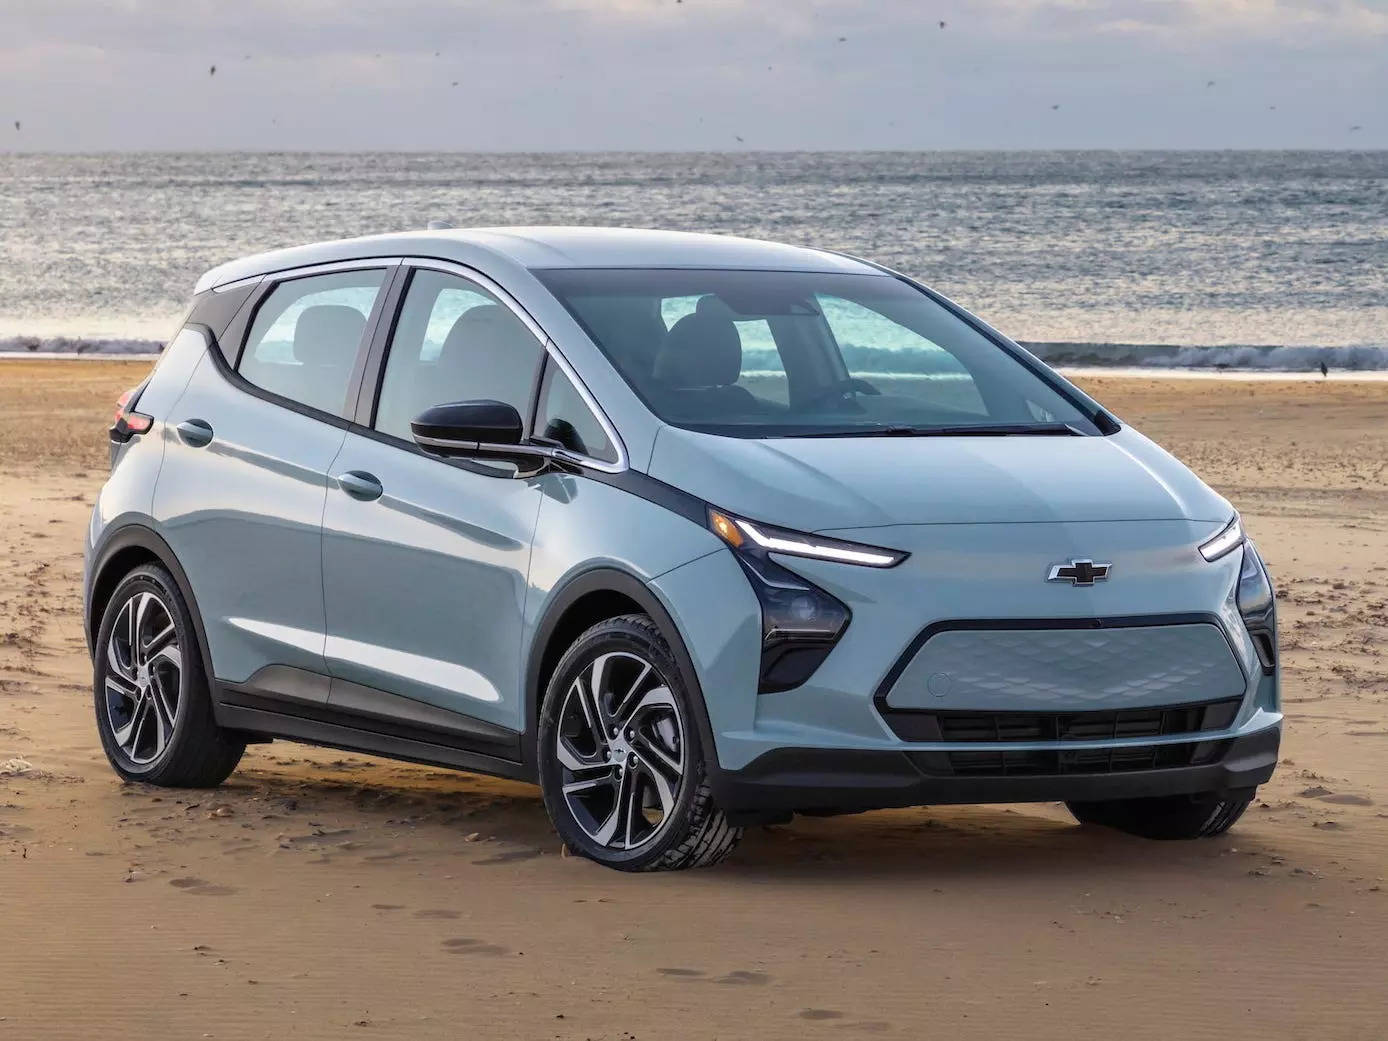 The 10 cheapest electric cars you can buy in 2022, from the Nissan Leaf to the Ford F-150 Lightning